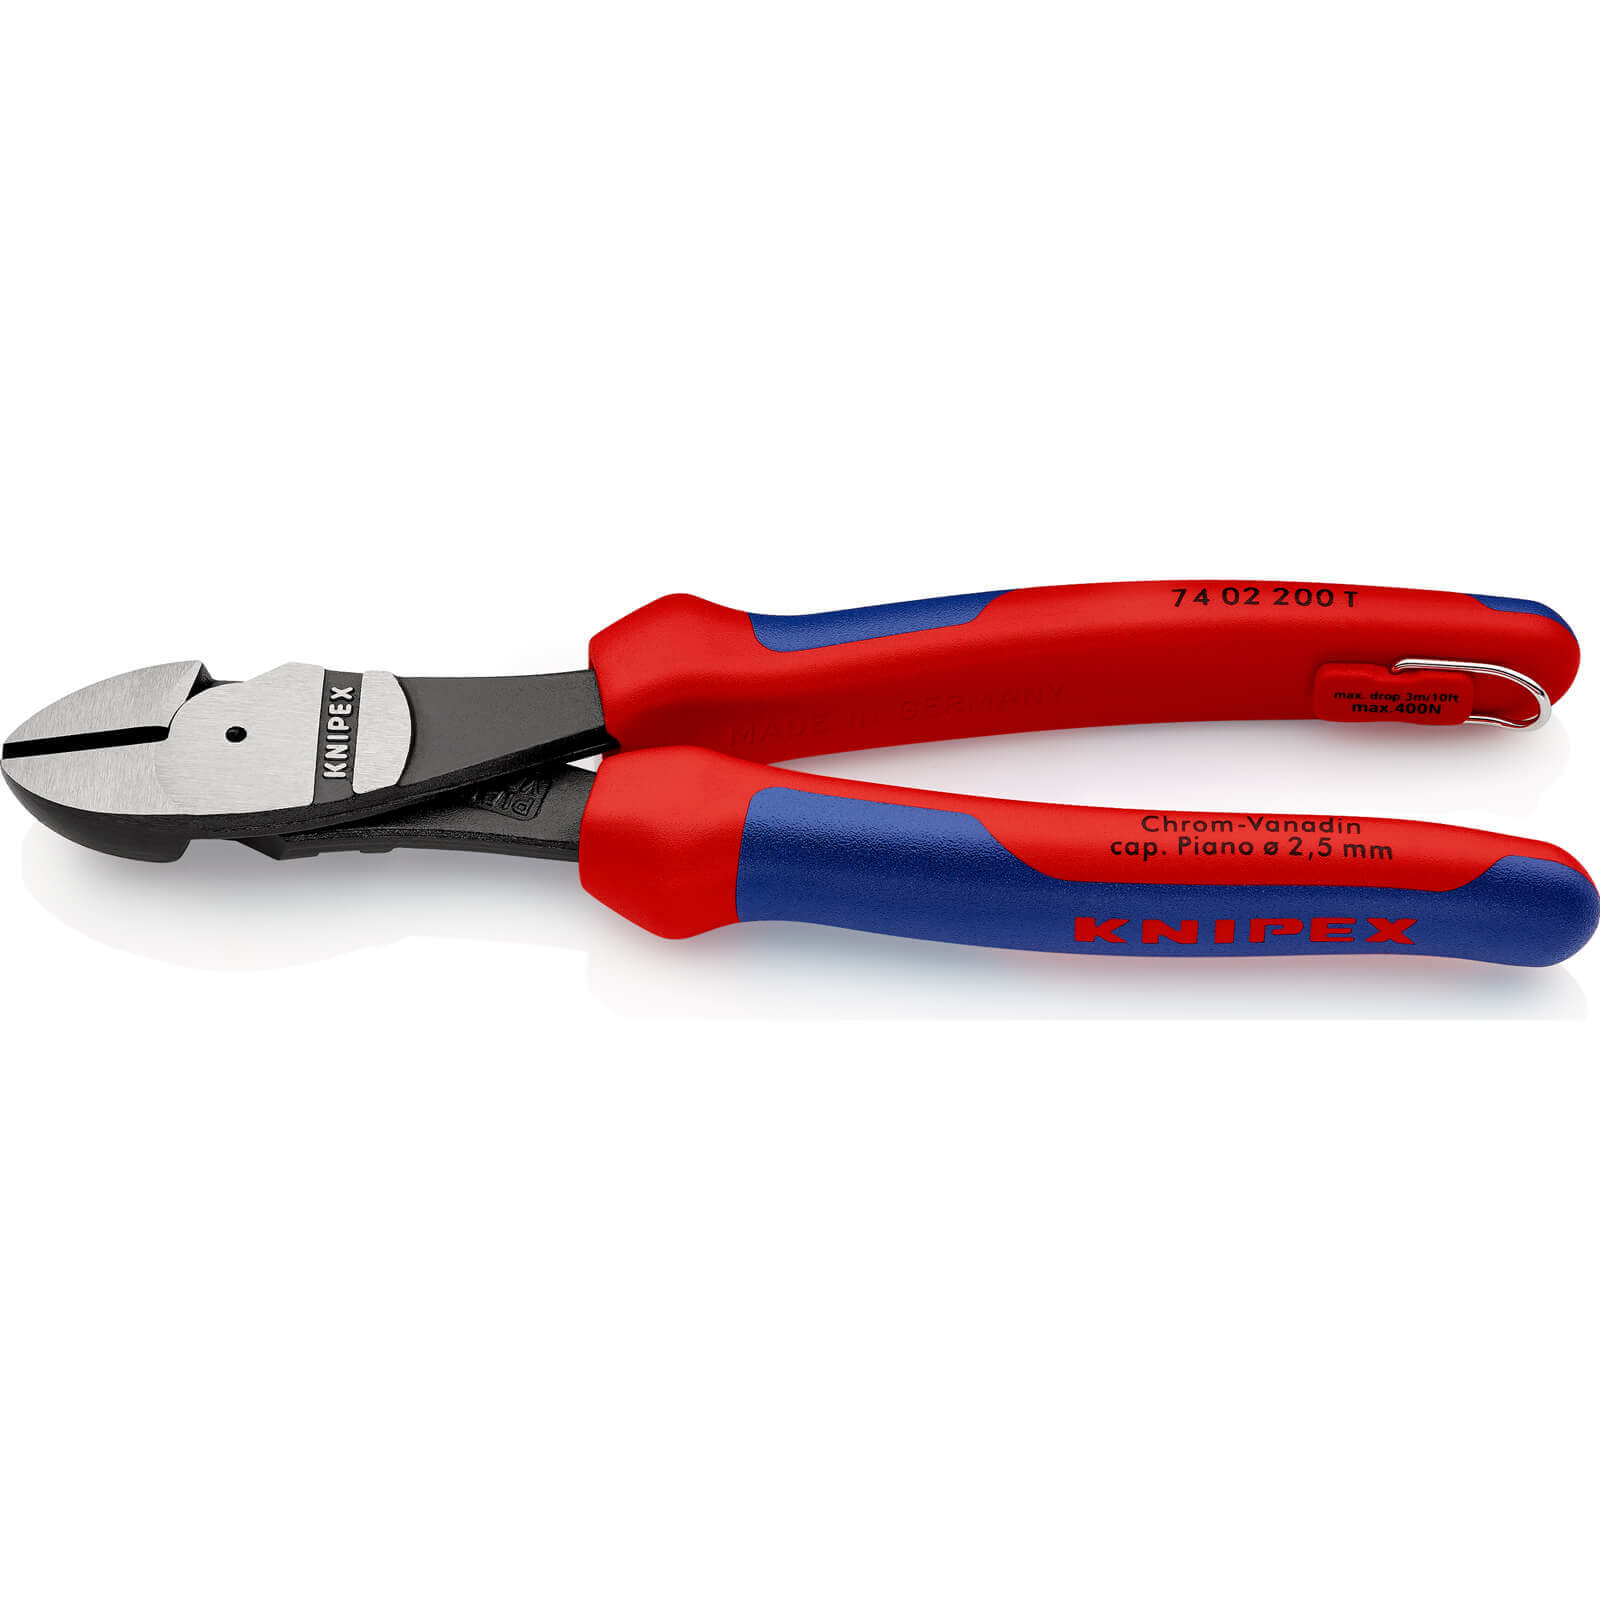 Image of Knipex 74 02 Tethered Diagonal Cutting Pliers 200mm